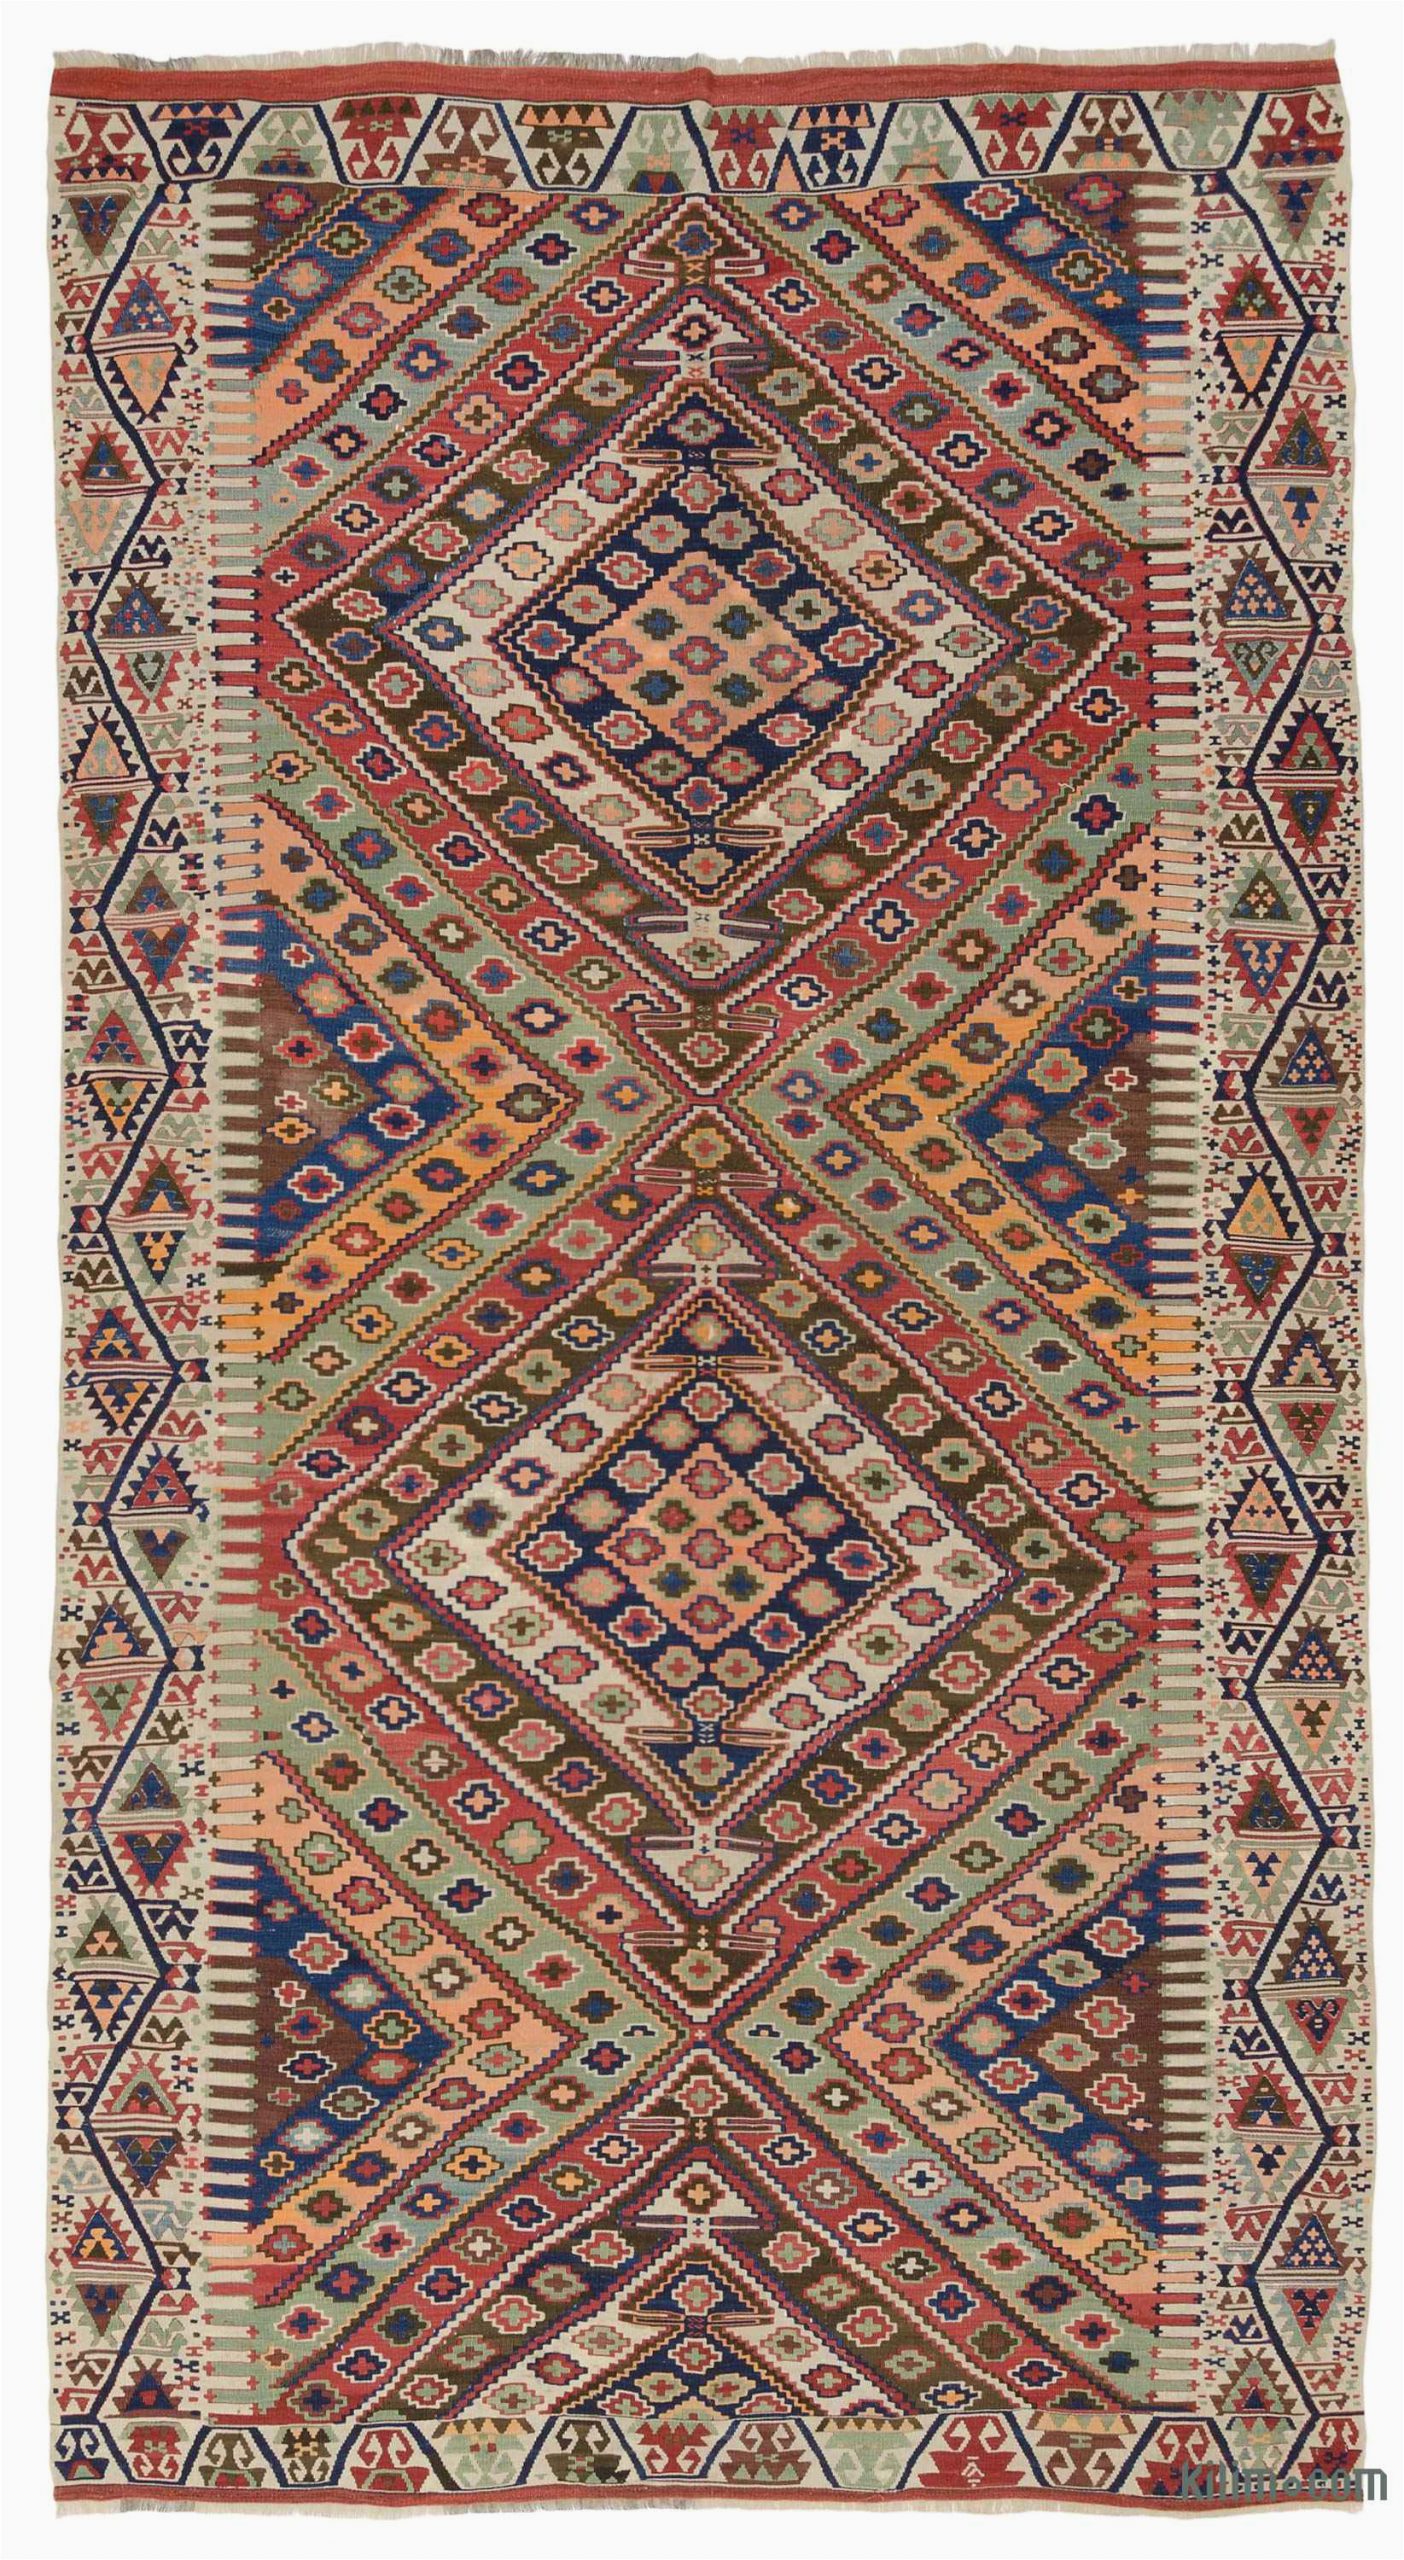 Area Rugs Made In Turkey What is A Kilim